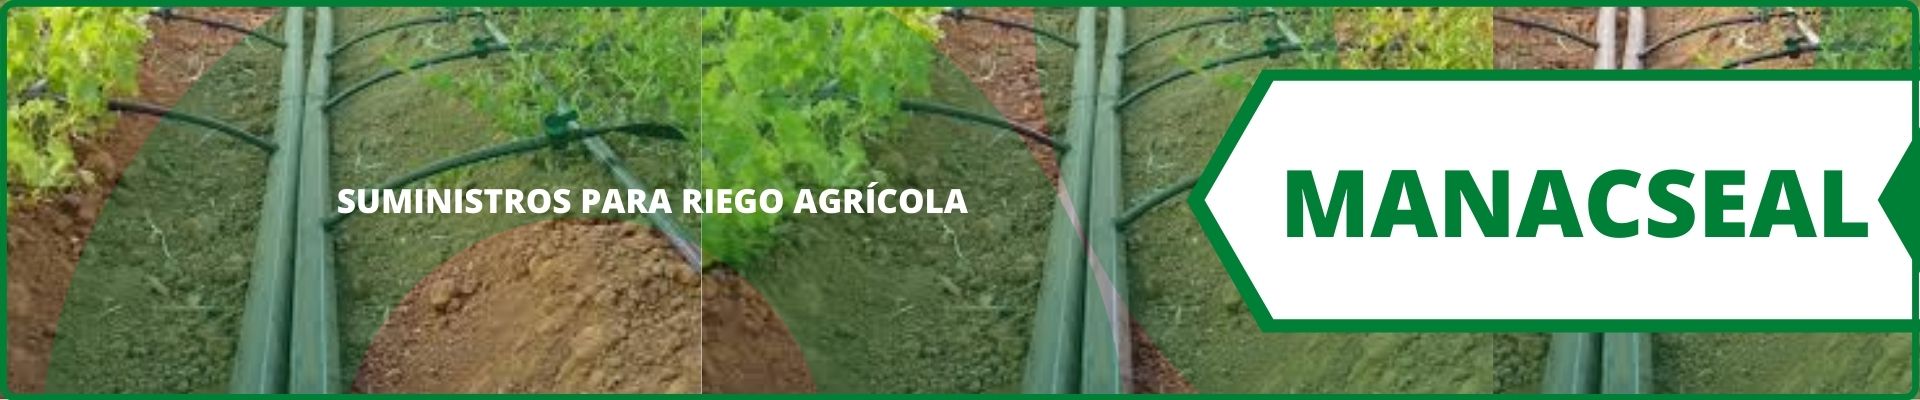 Manacseal agroshow banner